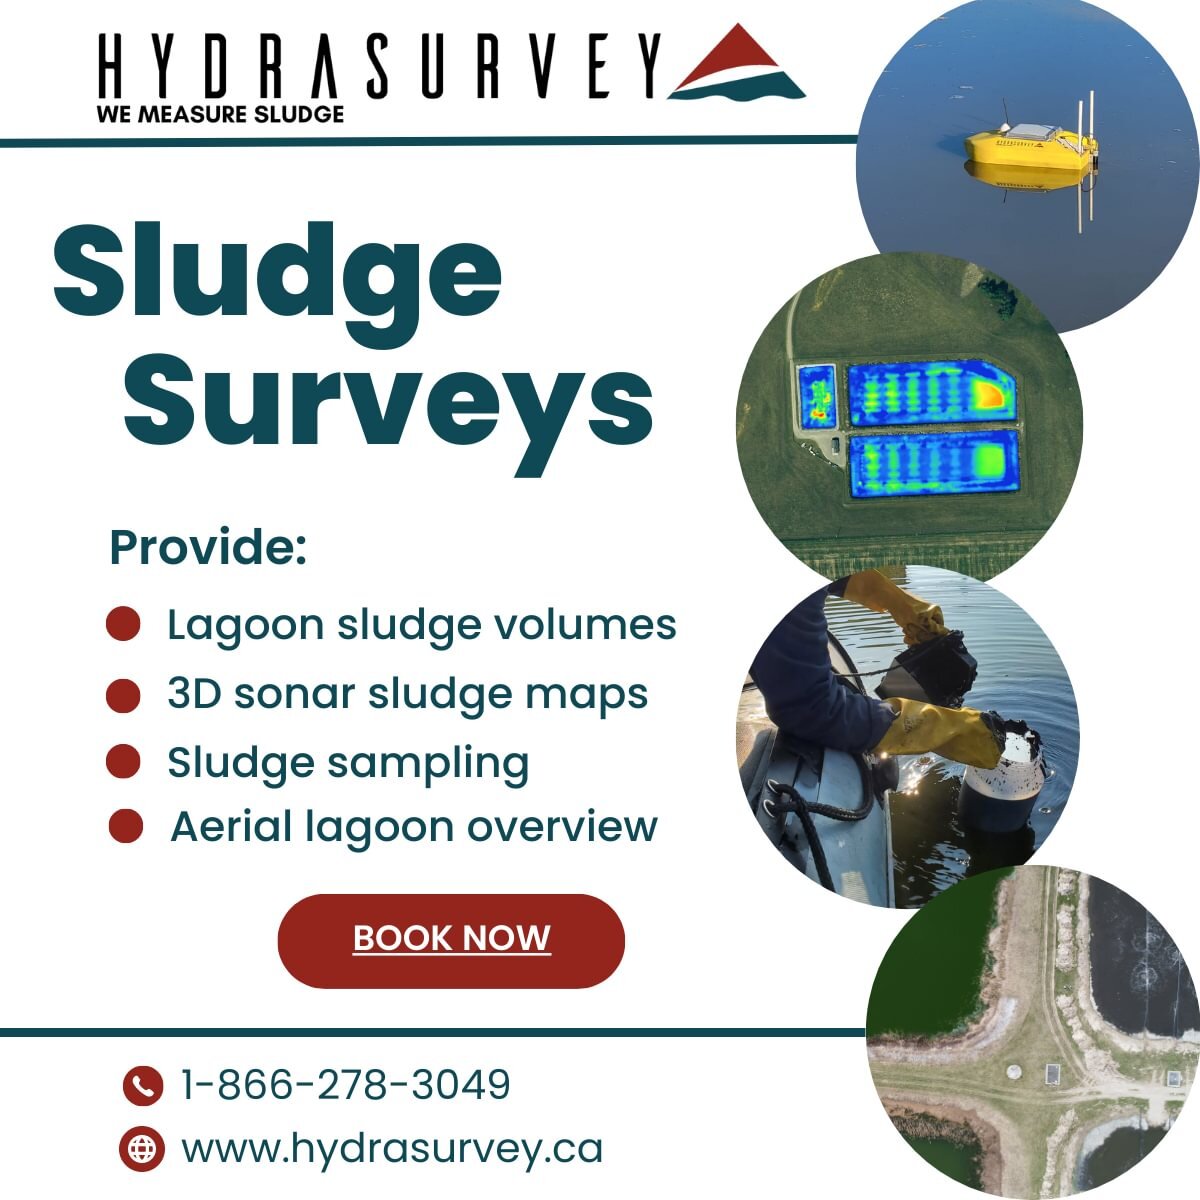 Planning a lagoon dredging project? Start with a survey to determine how much sludge is in your lagoon and what your biosolid disposal options are. #sludge #dredging #dronetechnology